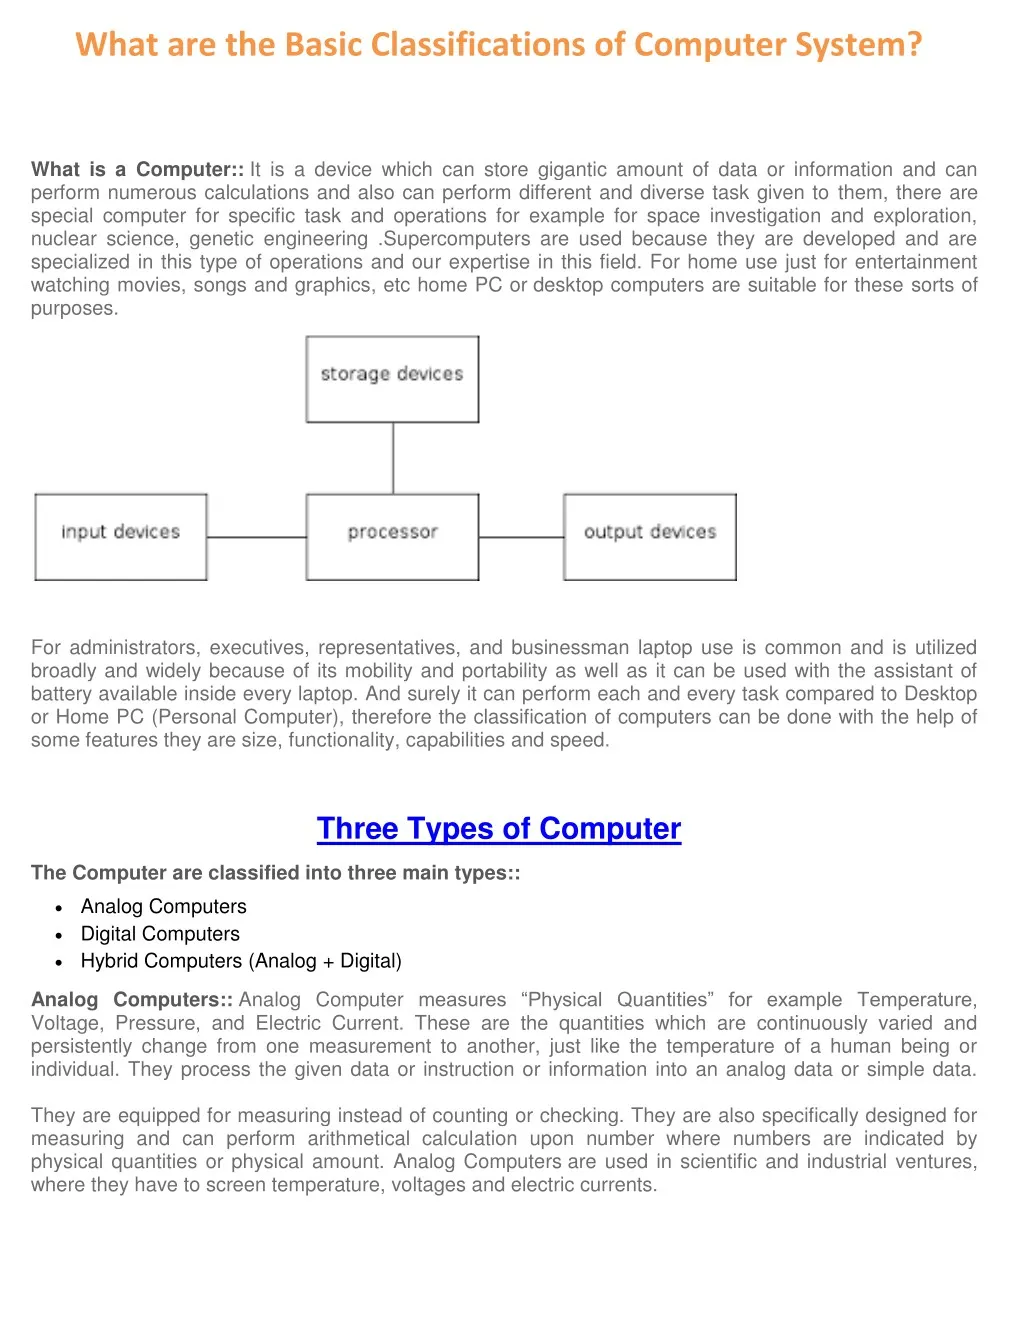 what are the basic classifications of computer